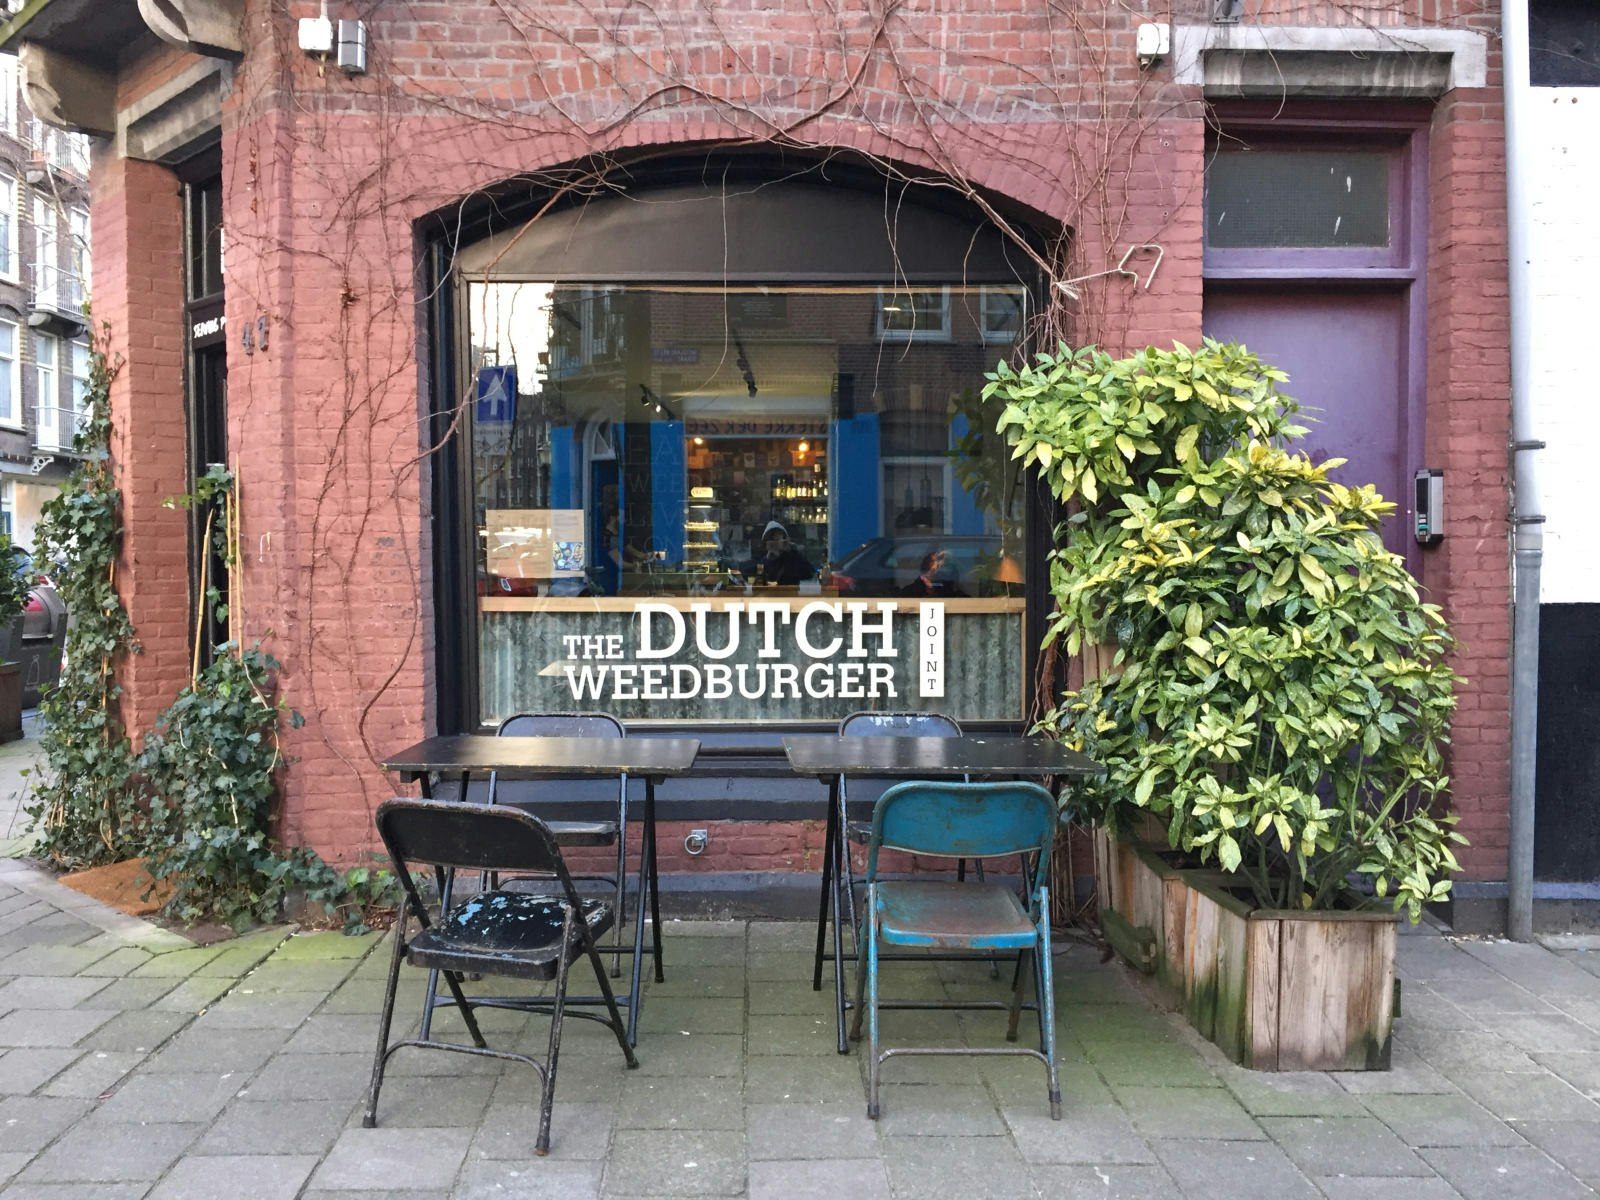 The exterior of The Dutch Weed Burger Joint restaurant in Amsterdam, The Netherlands © Claire Bissell / Lonely Planet